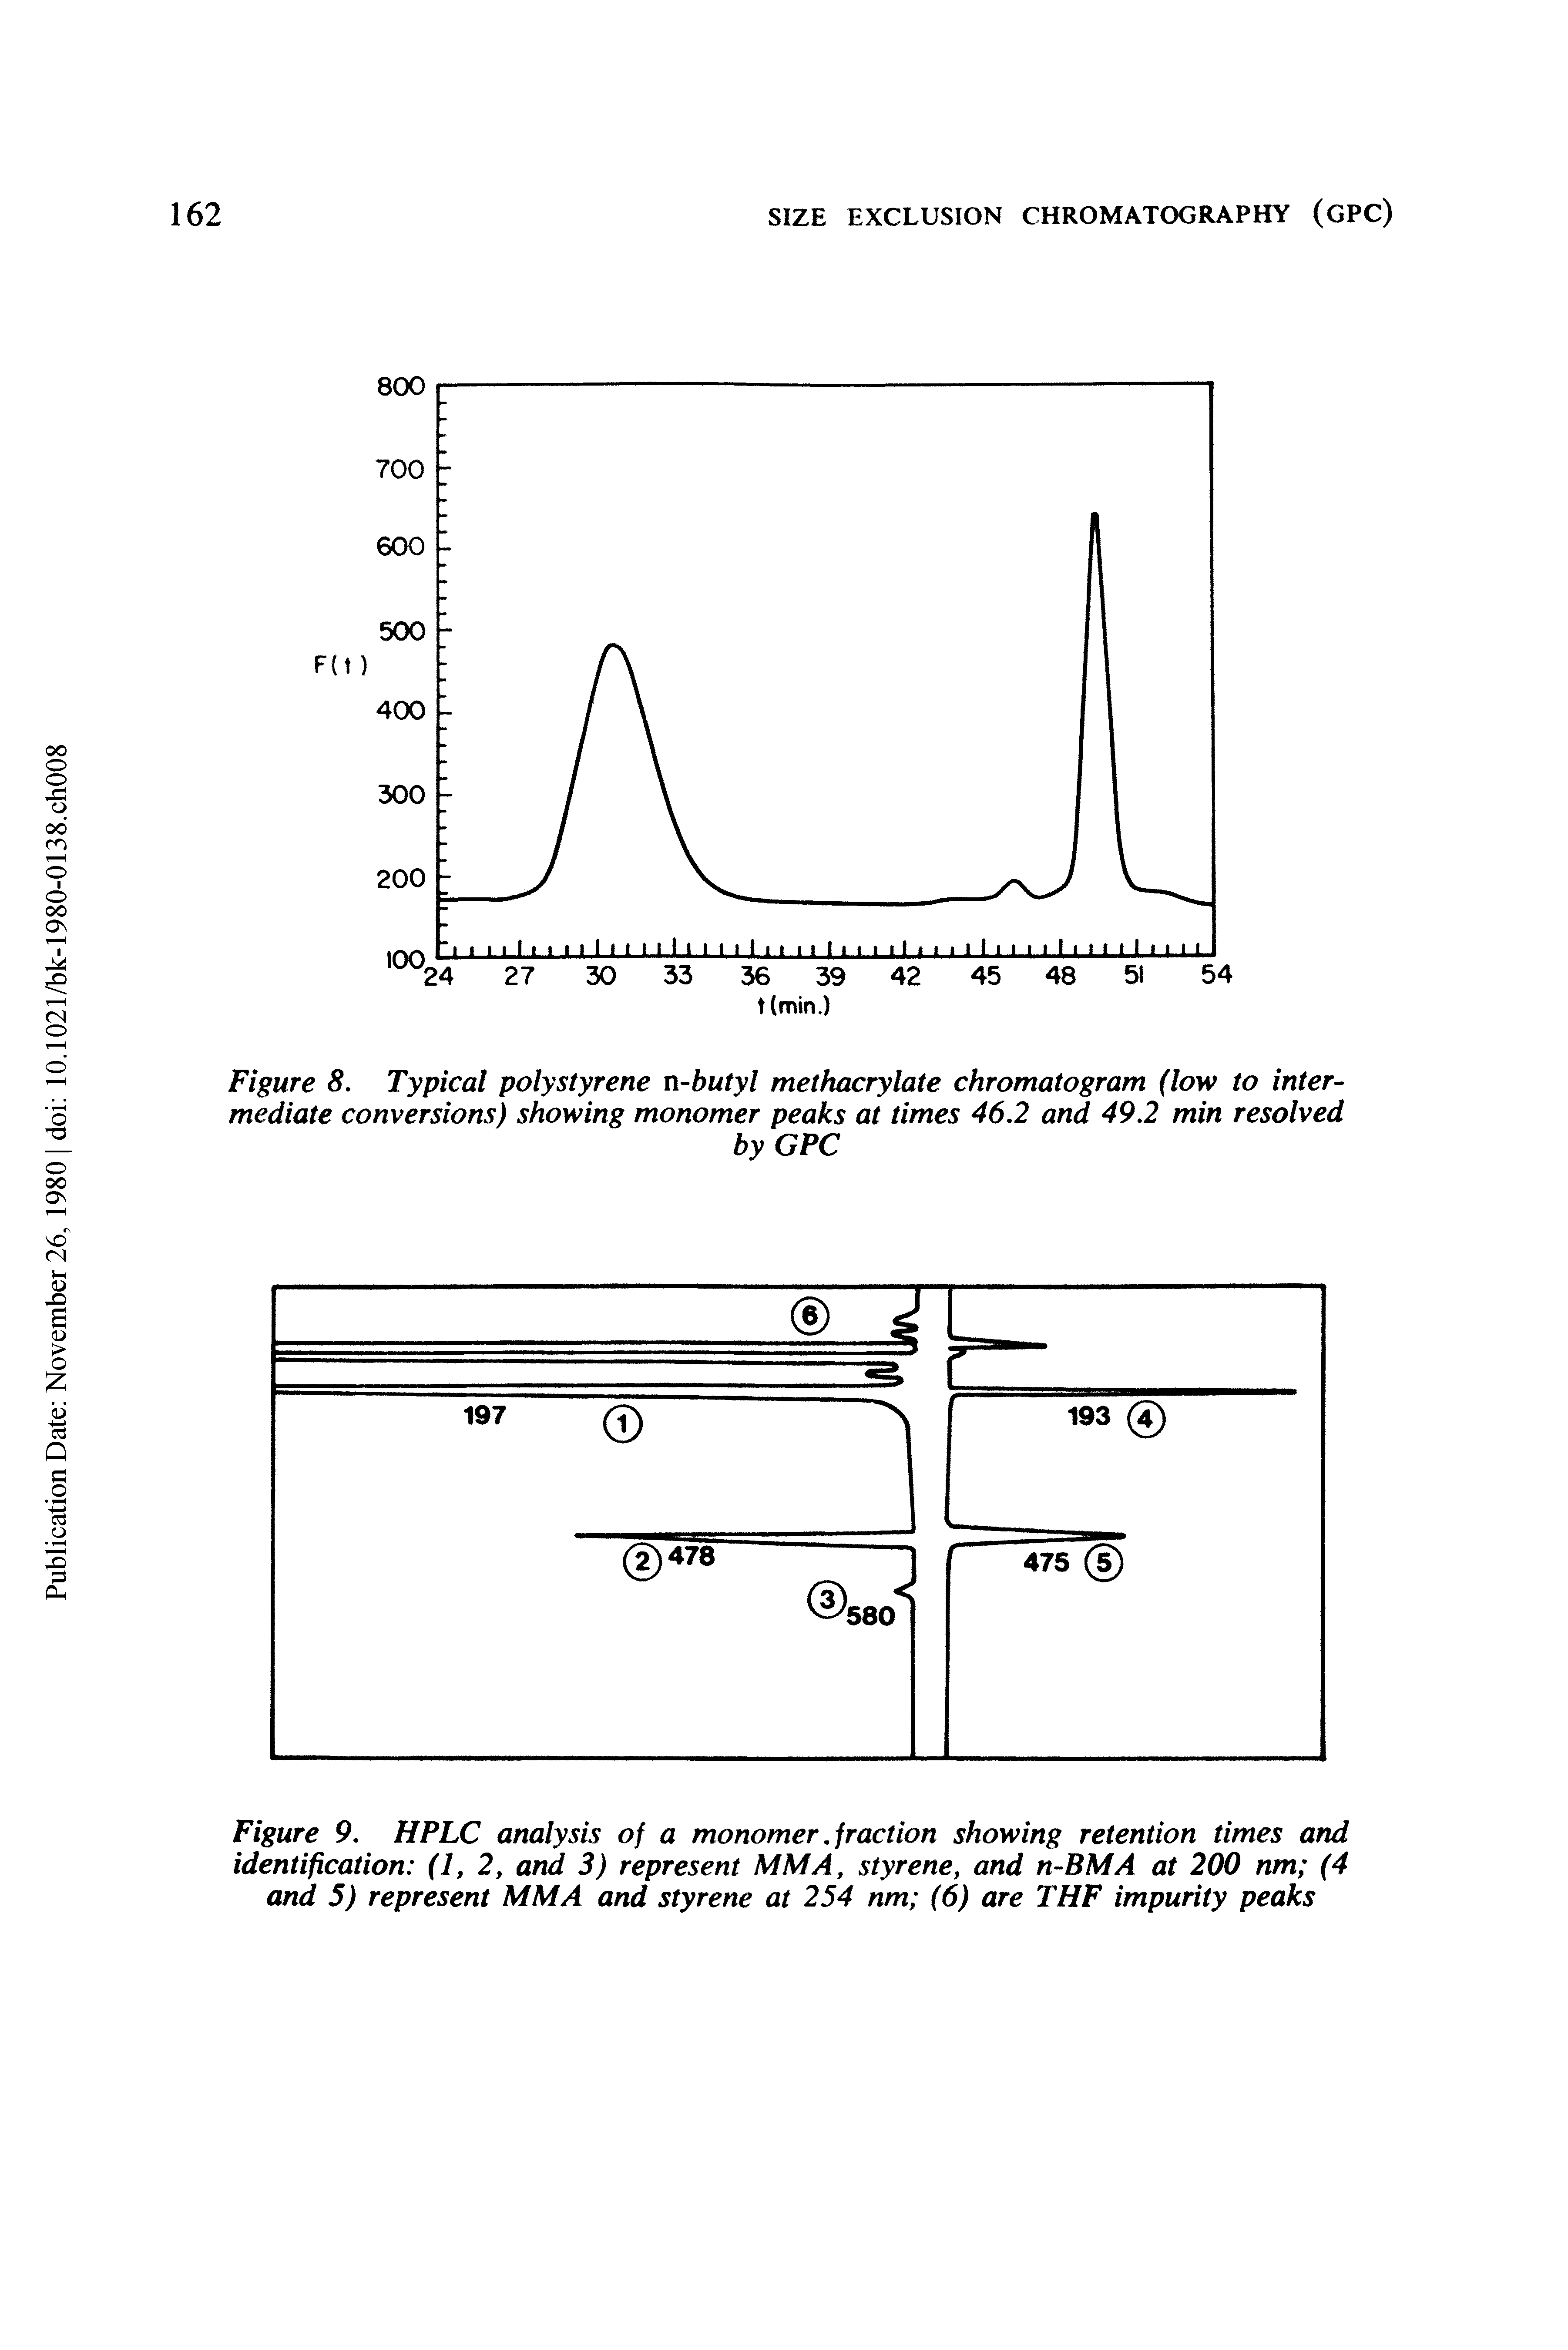 Figure 9. HPLC analysis of a monomer, fraction showing retention times and identification (1,2, and 3) represent MM A, styrene, and n-BMA at 200 nm (4 and 5) represent MM A and styrene at 254 nm (6) are THF impurity peaks...